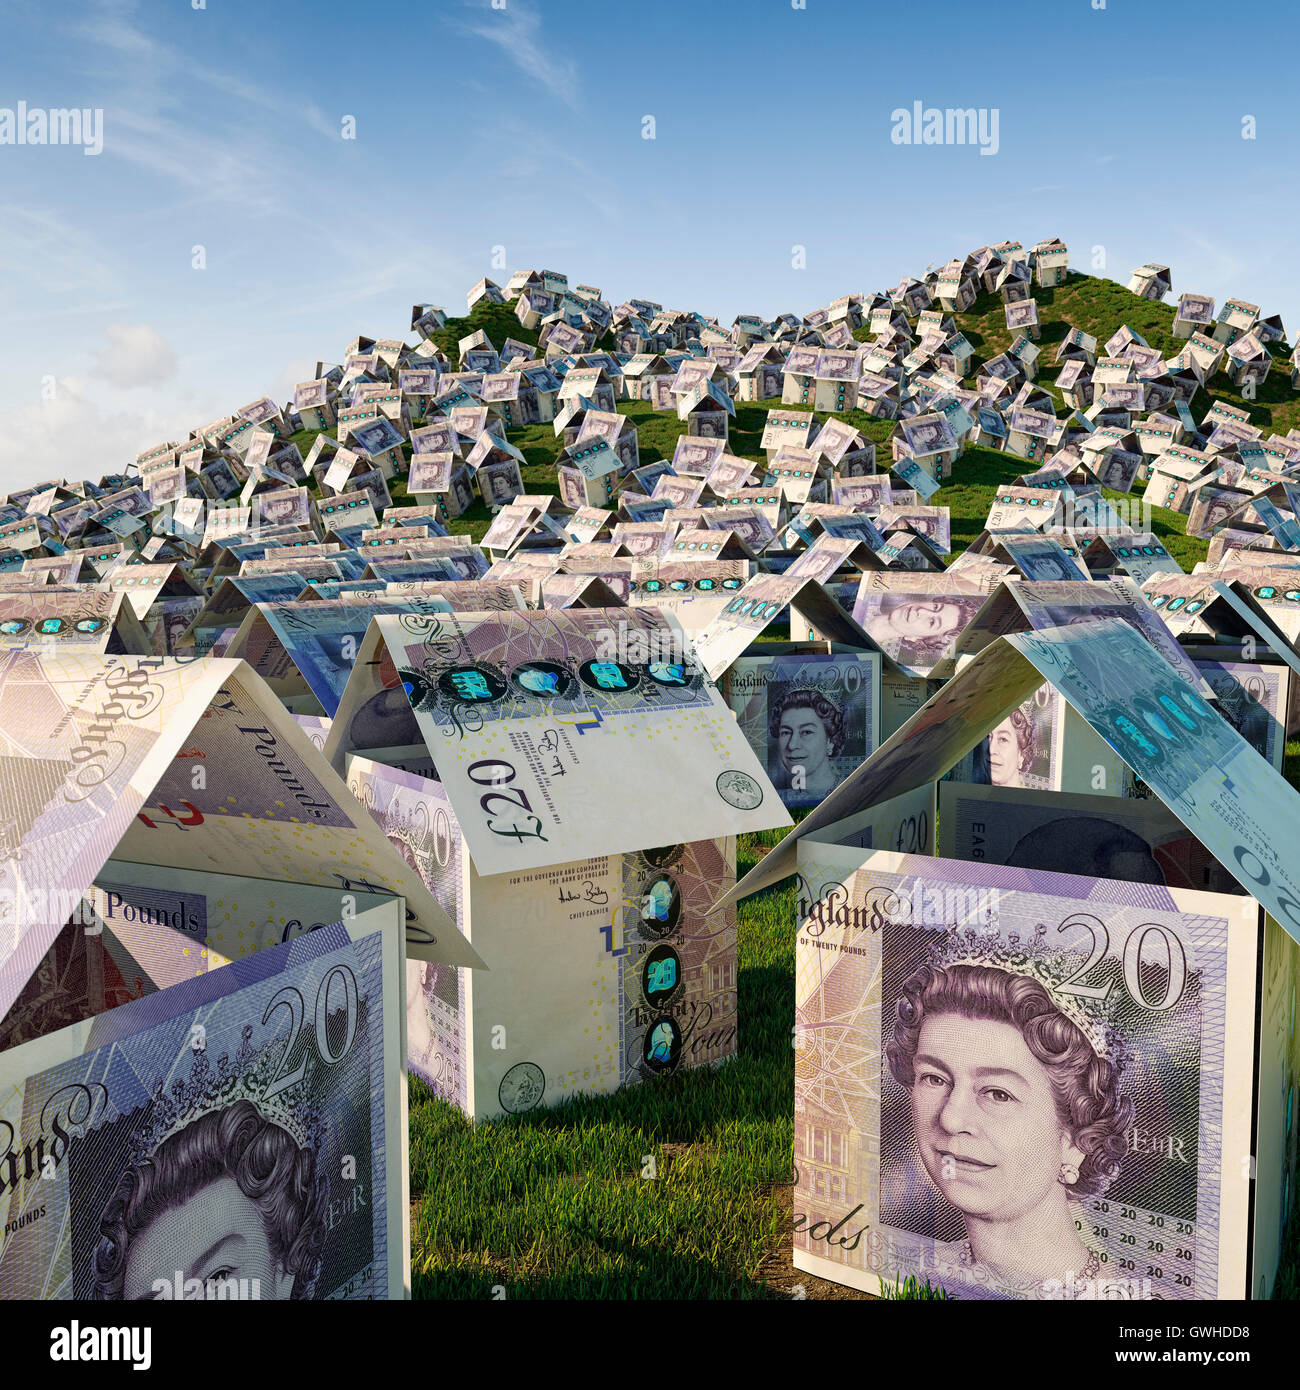 UK housing crisis - House building concept, house prices and housing estate development concept Stock Photo